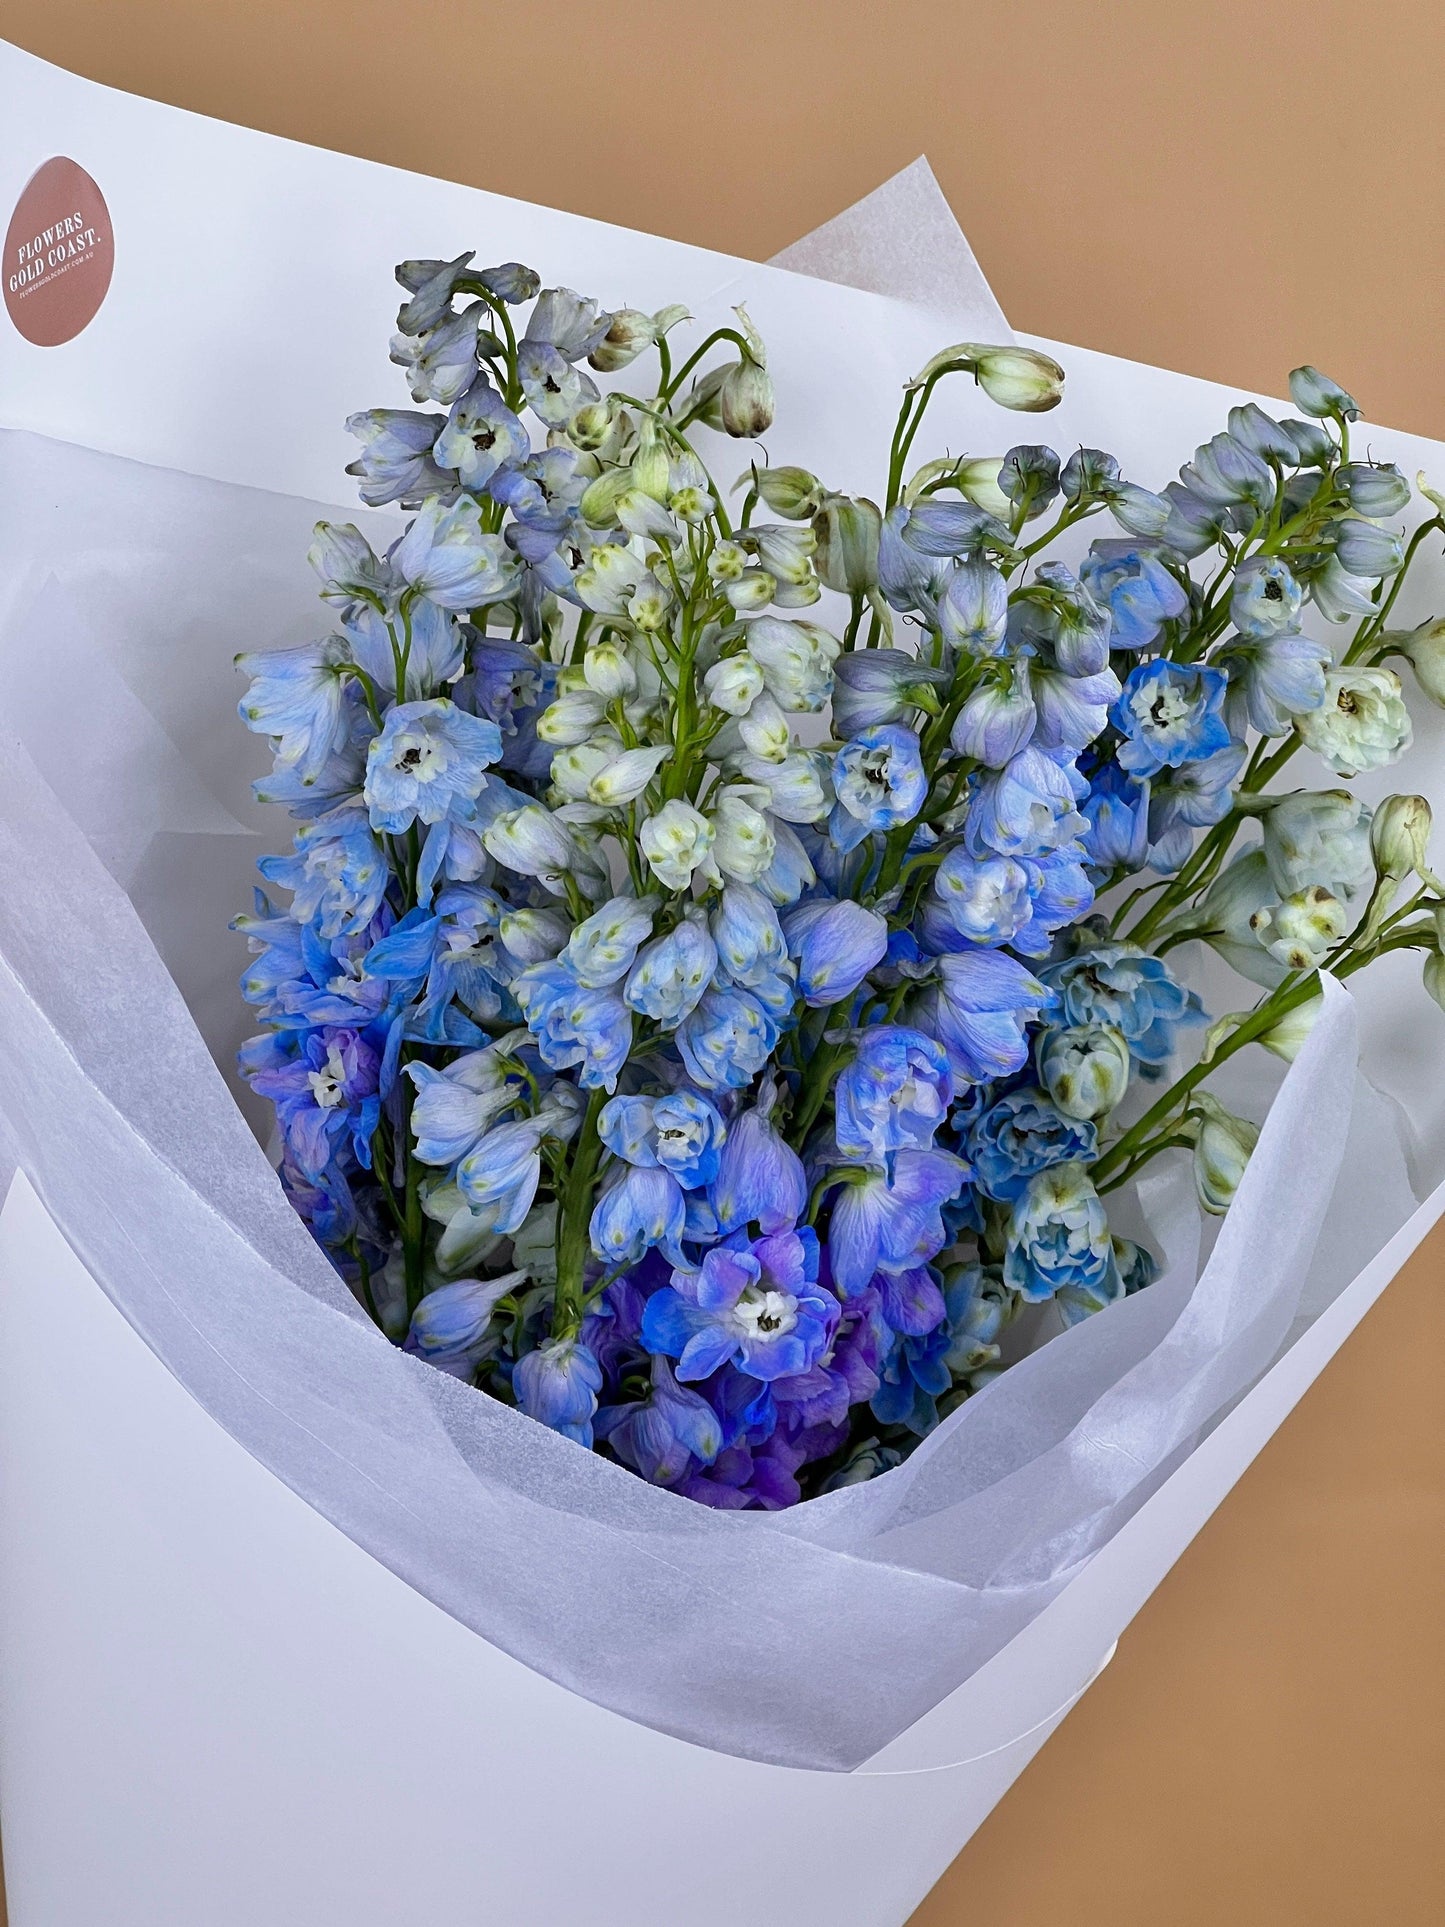 Delphinium Bunch -  made with love by Flowers Gold Coast www.flowersgoldcoast.com.au the Gold Coast's best Florist - Same Day Flower Delivery